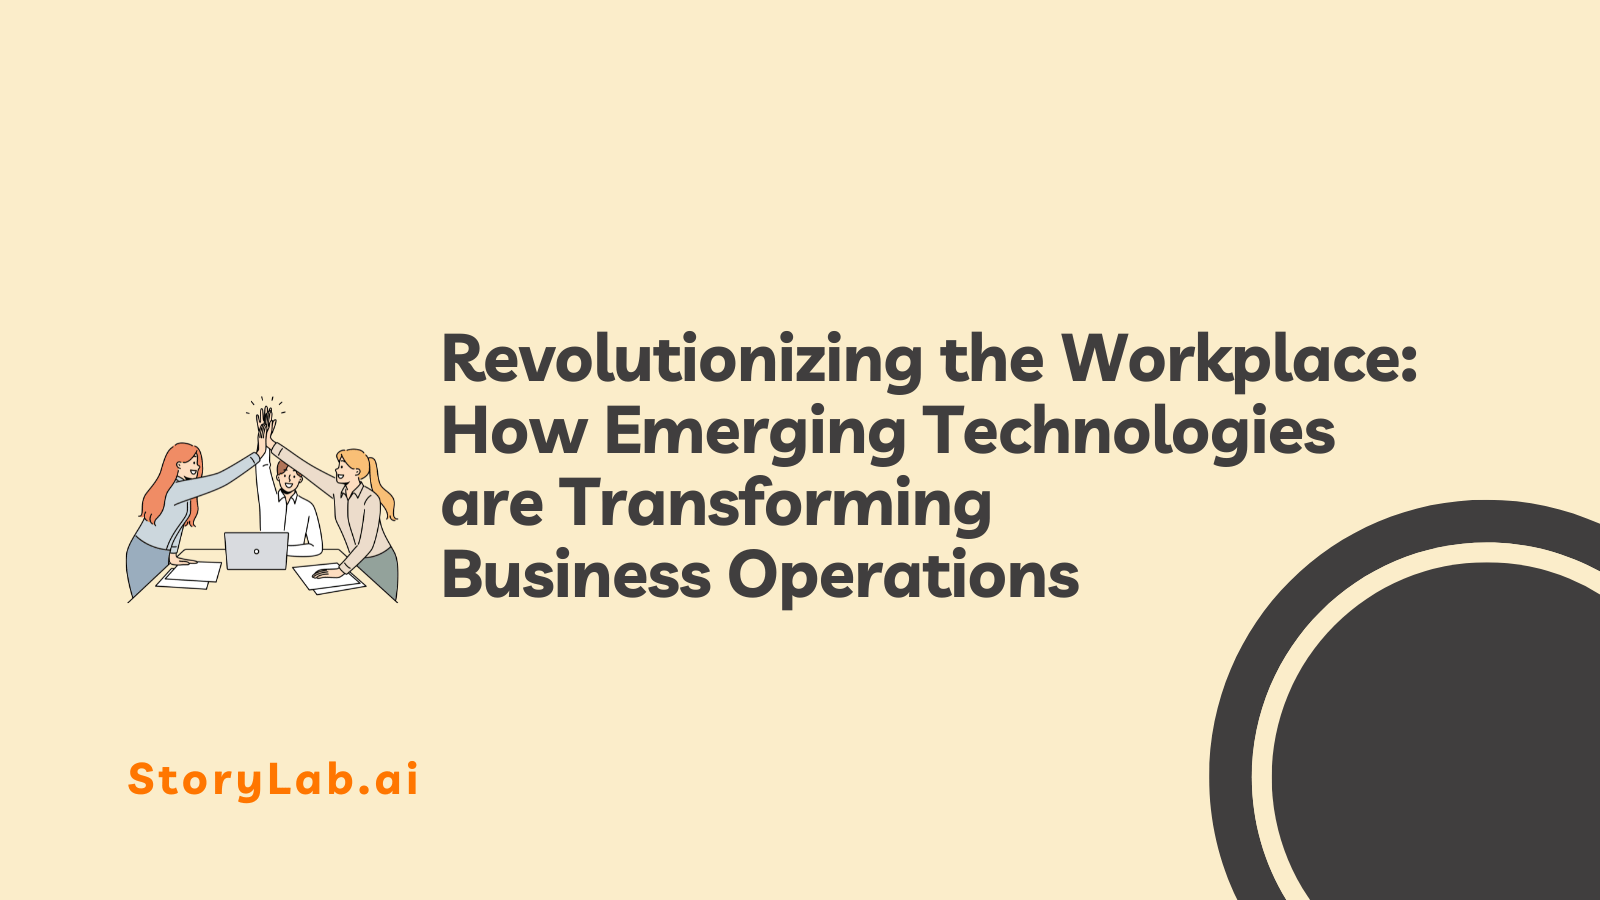 Revolutionizing the Workplace How Emerging Technologies are Transforming Business Operations